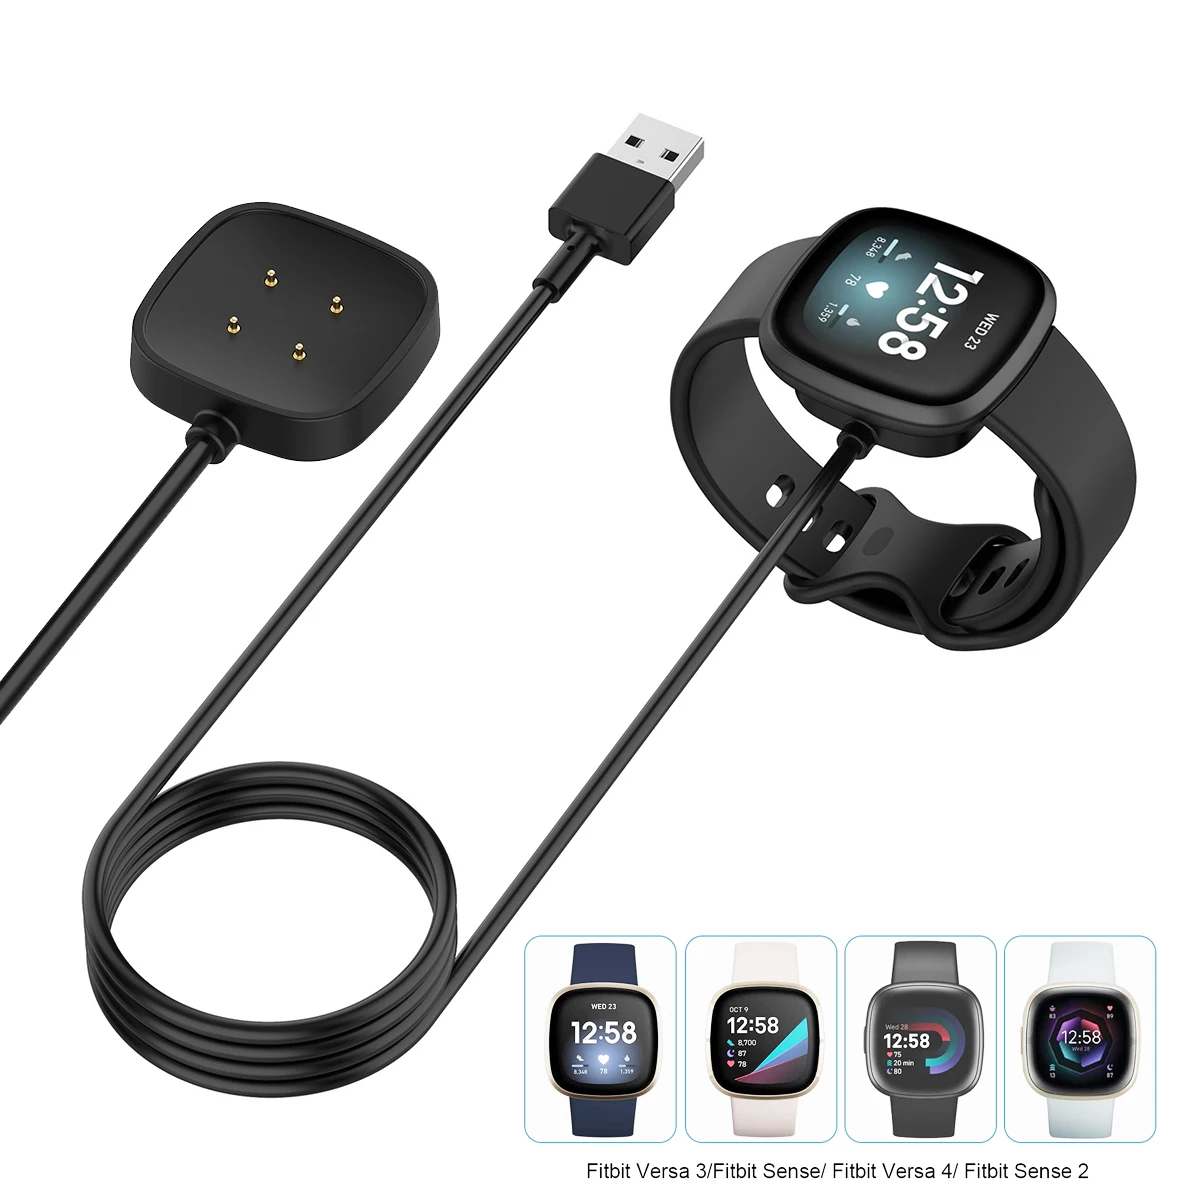 

Charging Dock For Fitbit Versa 3/4 sense 2/4 Smart Watch Charger Cable USB Charging Data Cradle For Fitbit Sense Charger Stand